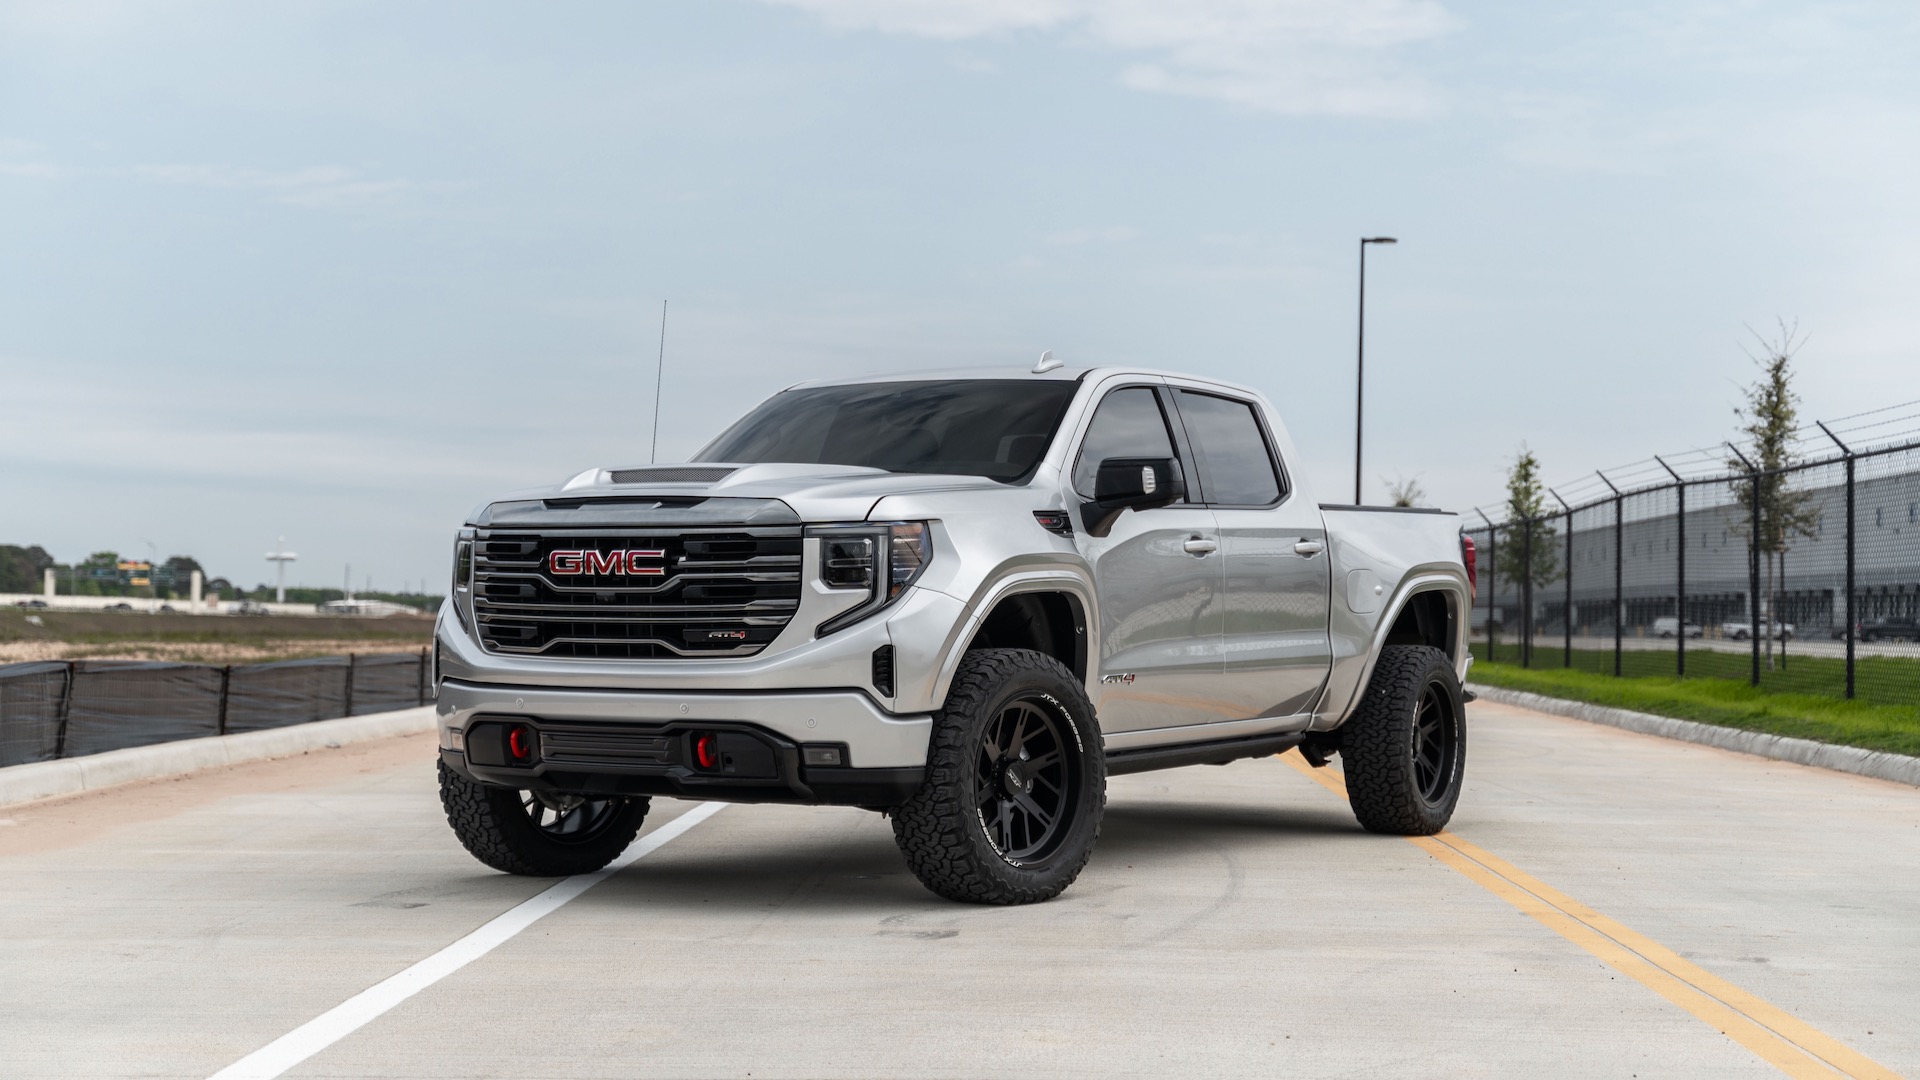 GMC Sierra 1500 gets the PaxPower Jackal treatment with up to 650 hp Auto Recent